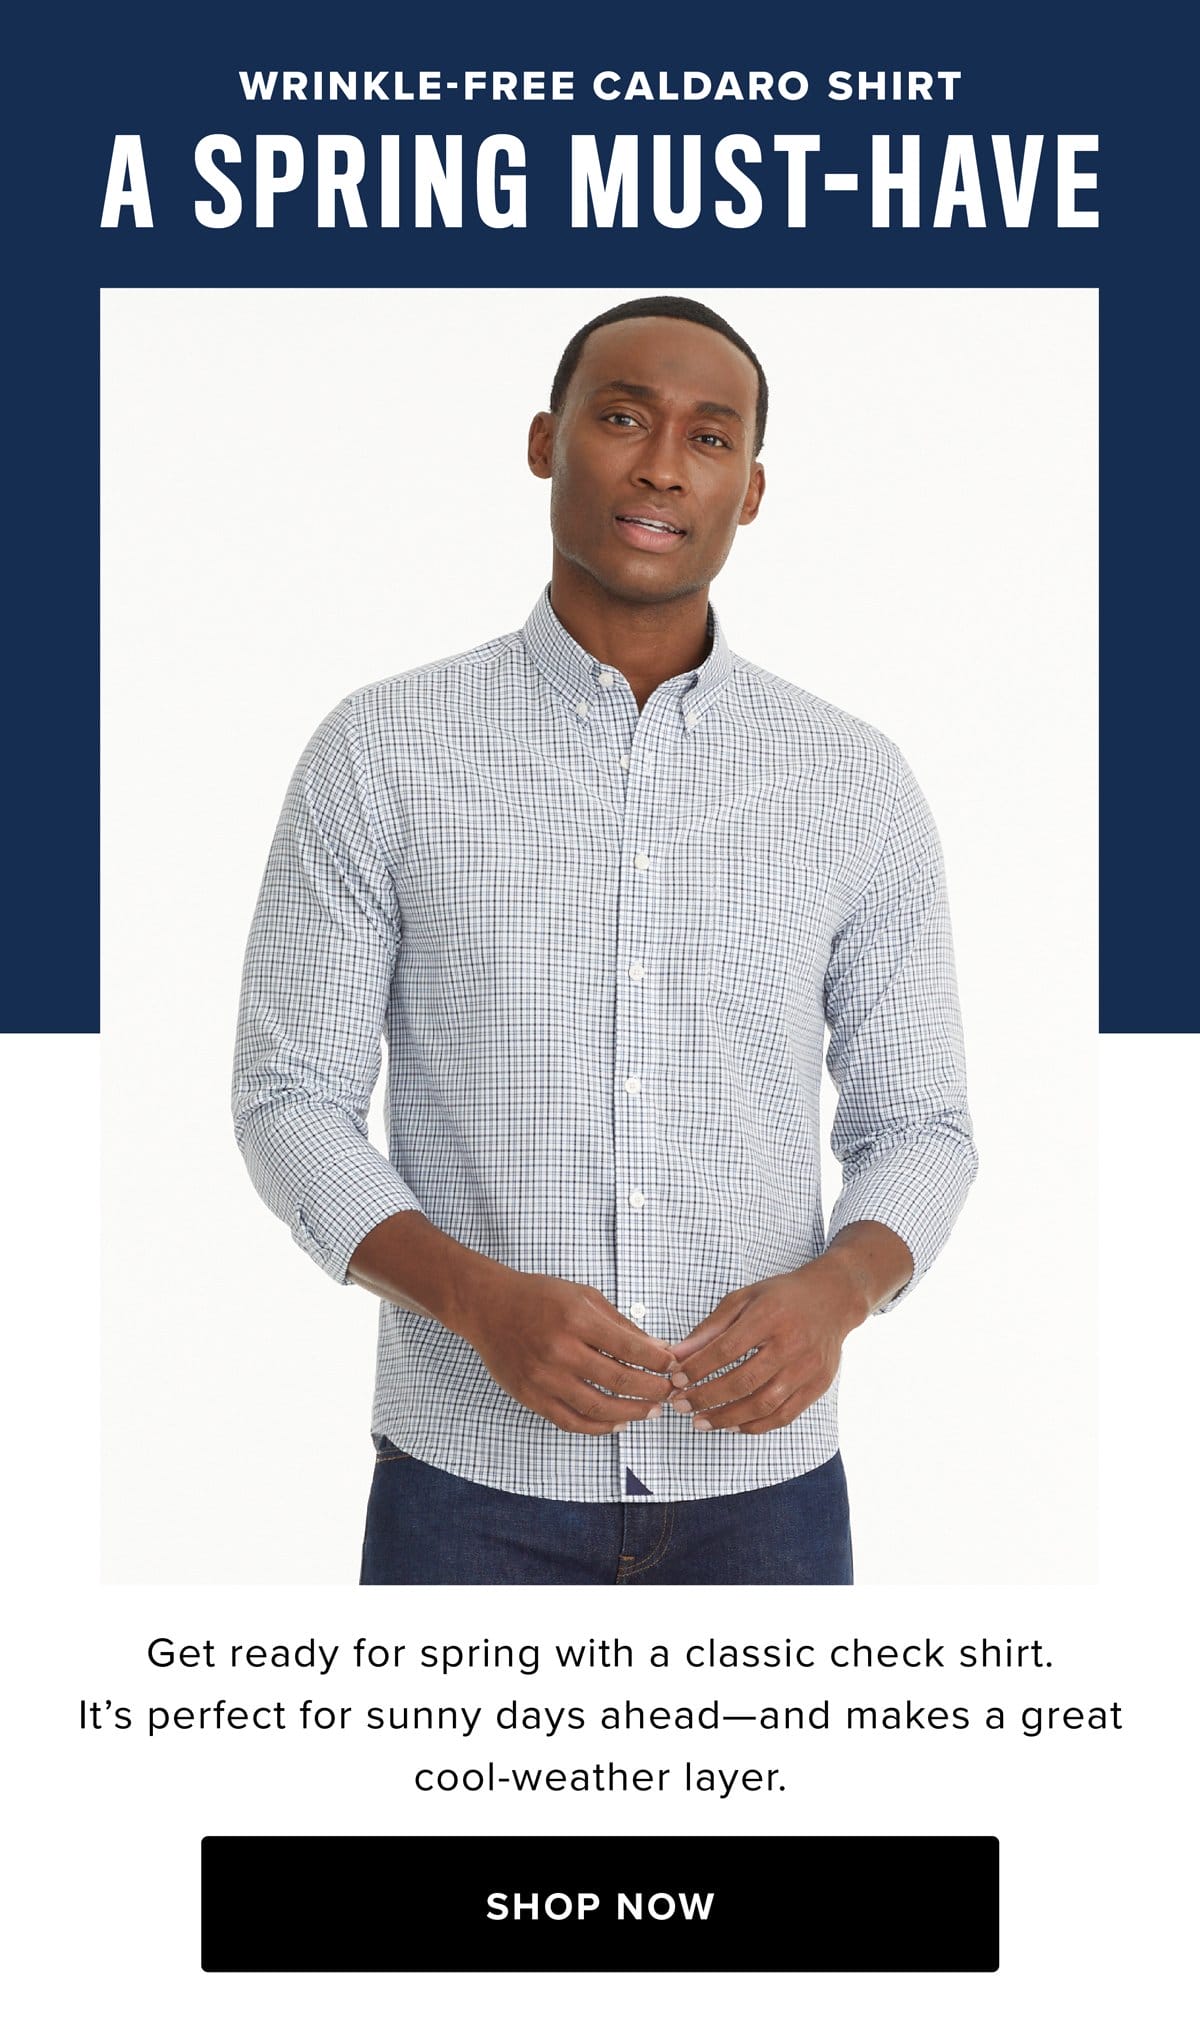 Wrinkle-Free Caldaro Shirt: A Spring Must-Have